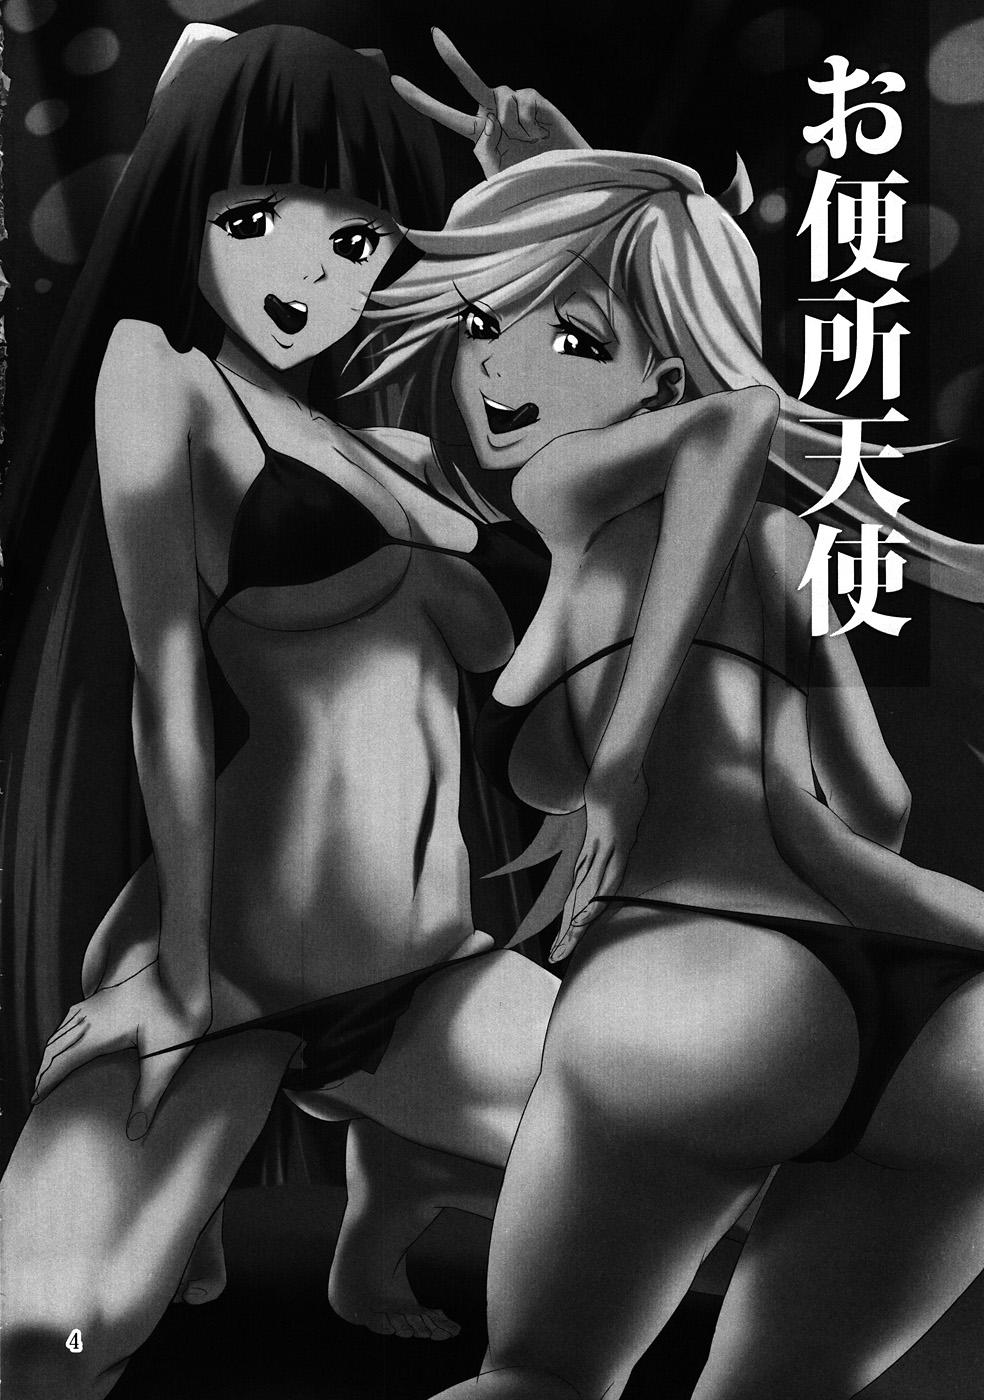 Girls Obenjo Tenshi - Panty and stocking with garterbelt Onlyfans - Page 3